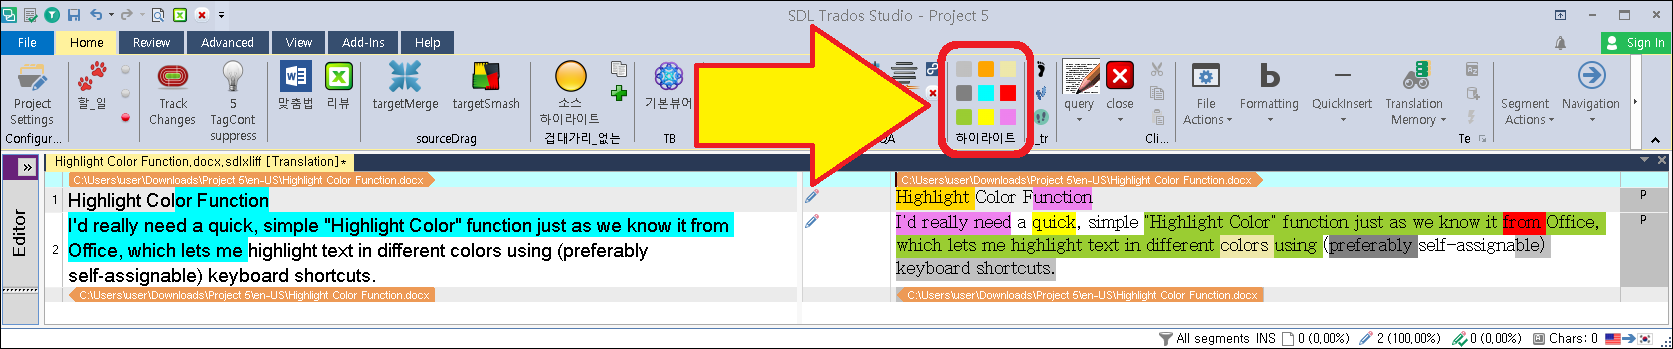 Screenshot of Trados Studio Ideas with a highlighted text feature request, showing the 'Highlight Color Function' in the editor and a color selection palette.